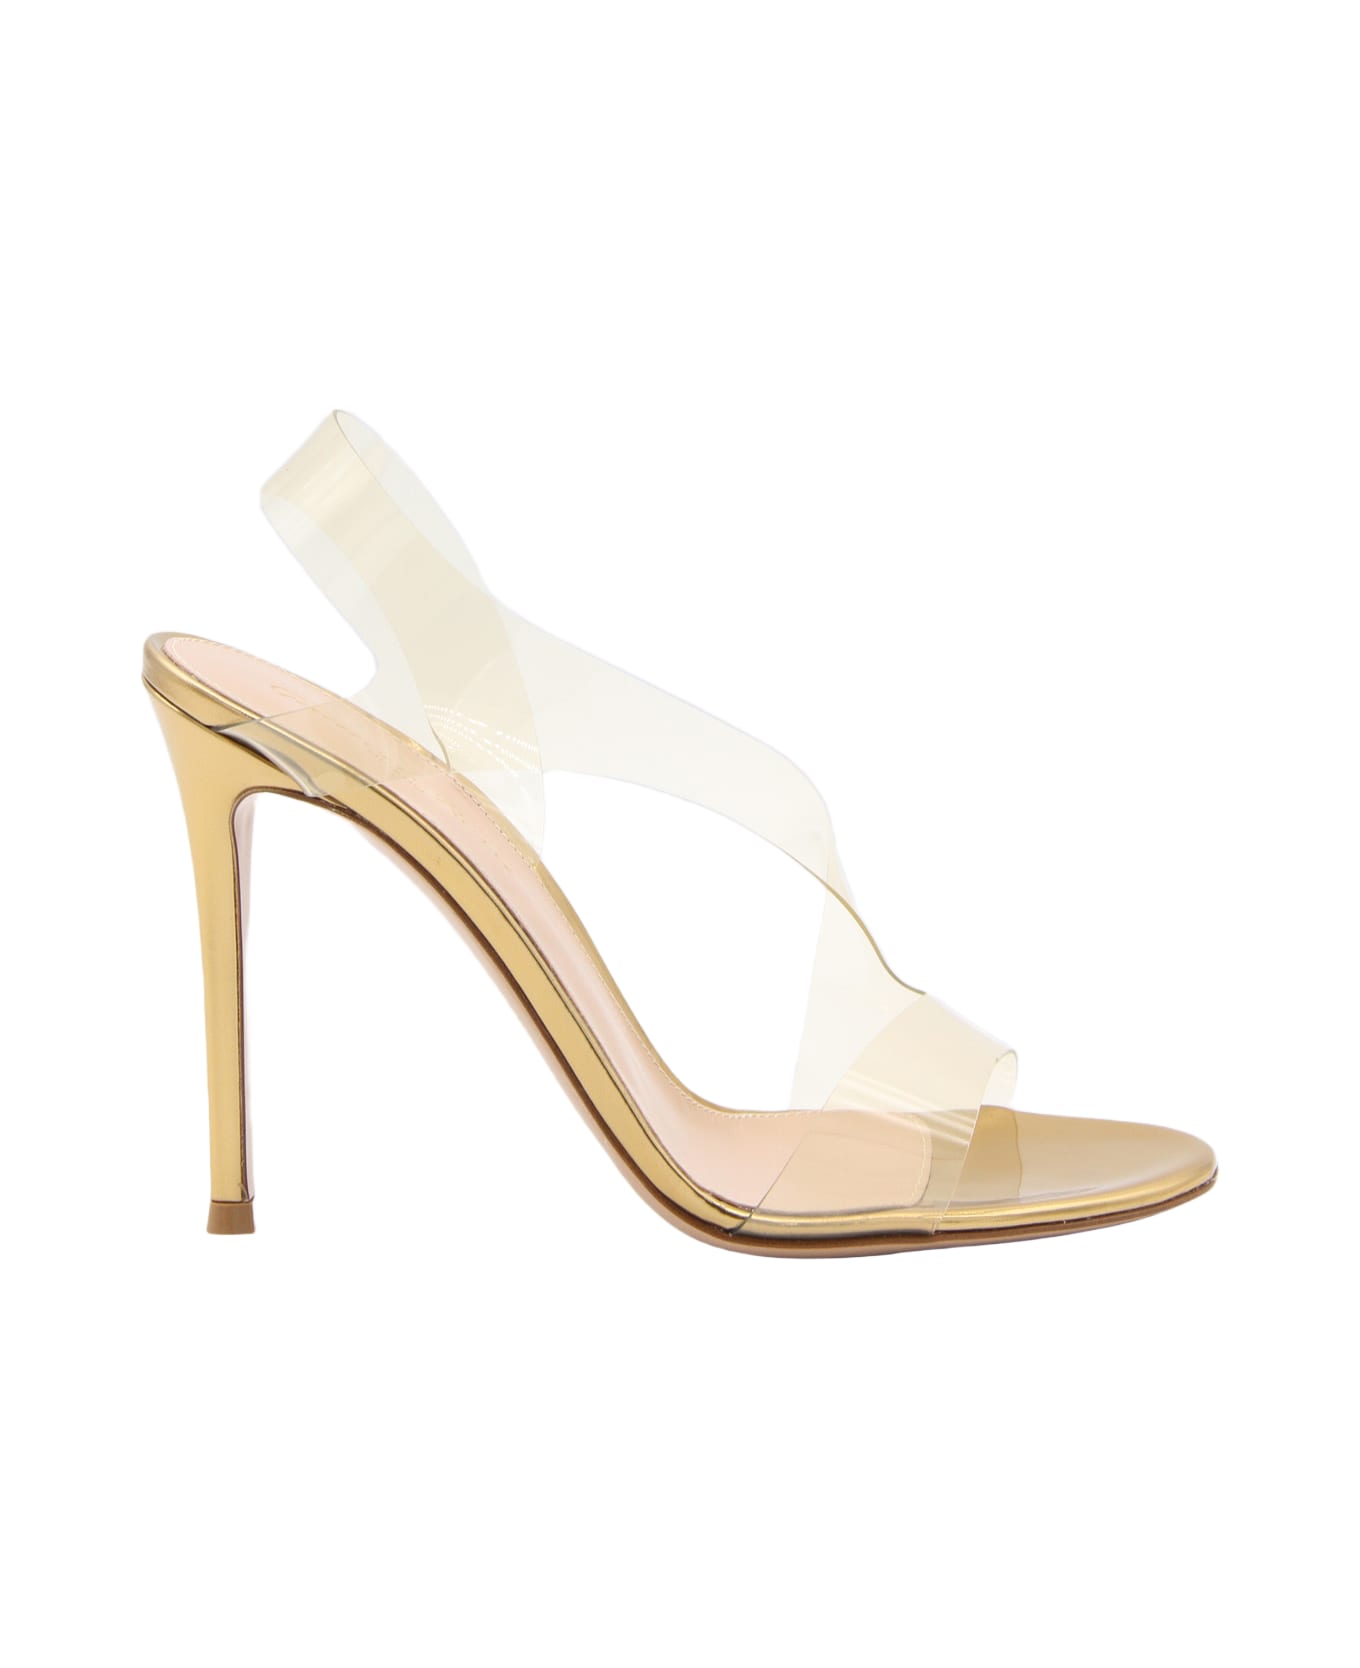 Gianvito Rossi Nude Leather And Pvc Metropolis Sandals - MEKONG+MEKONG